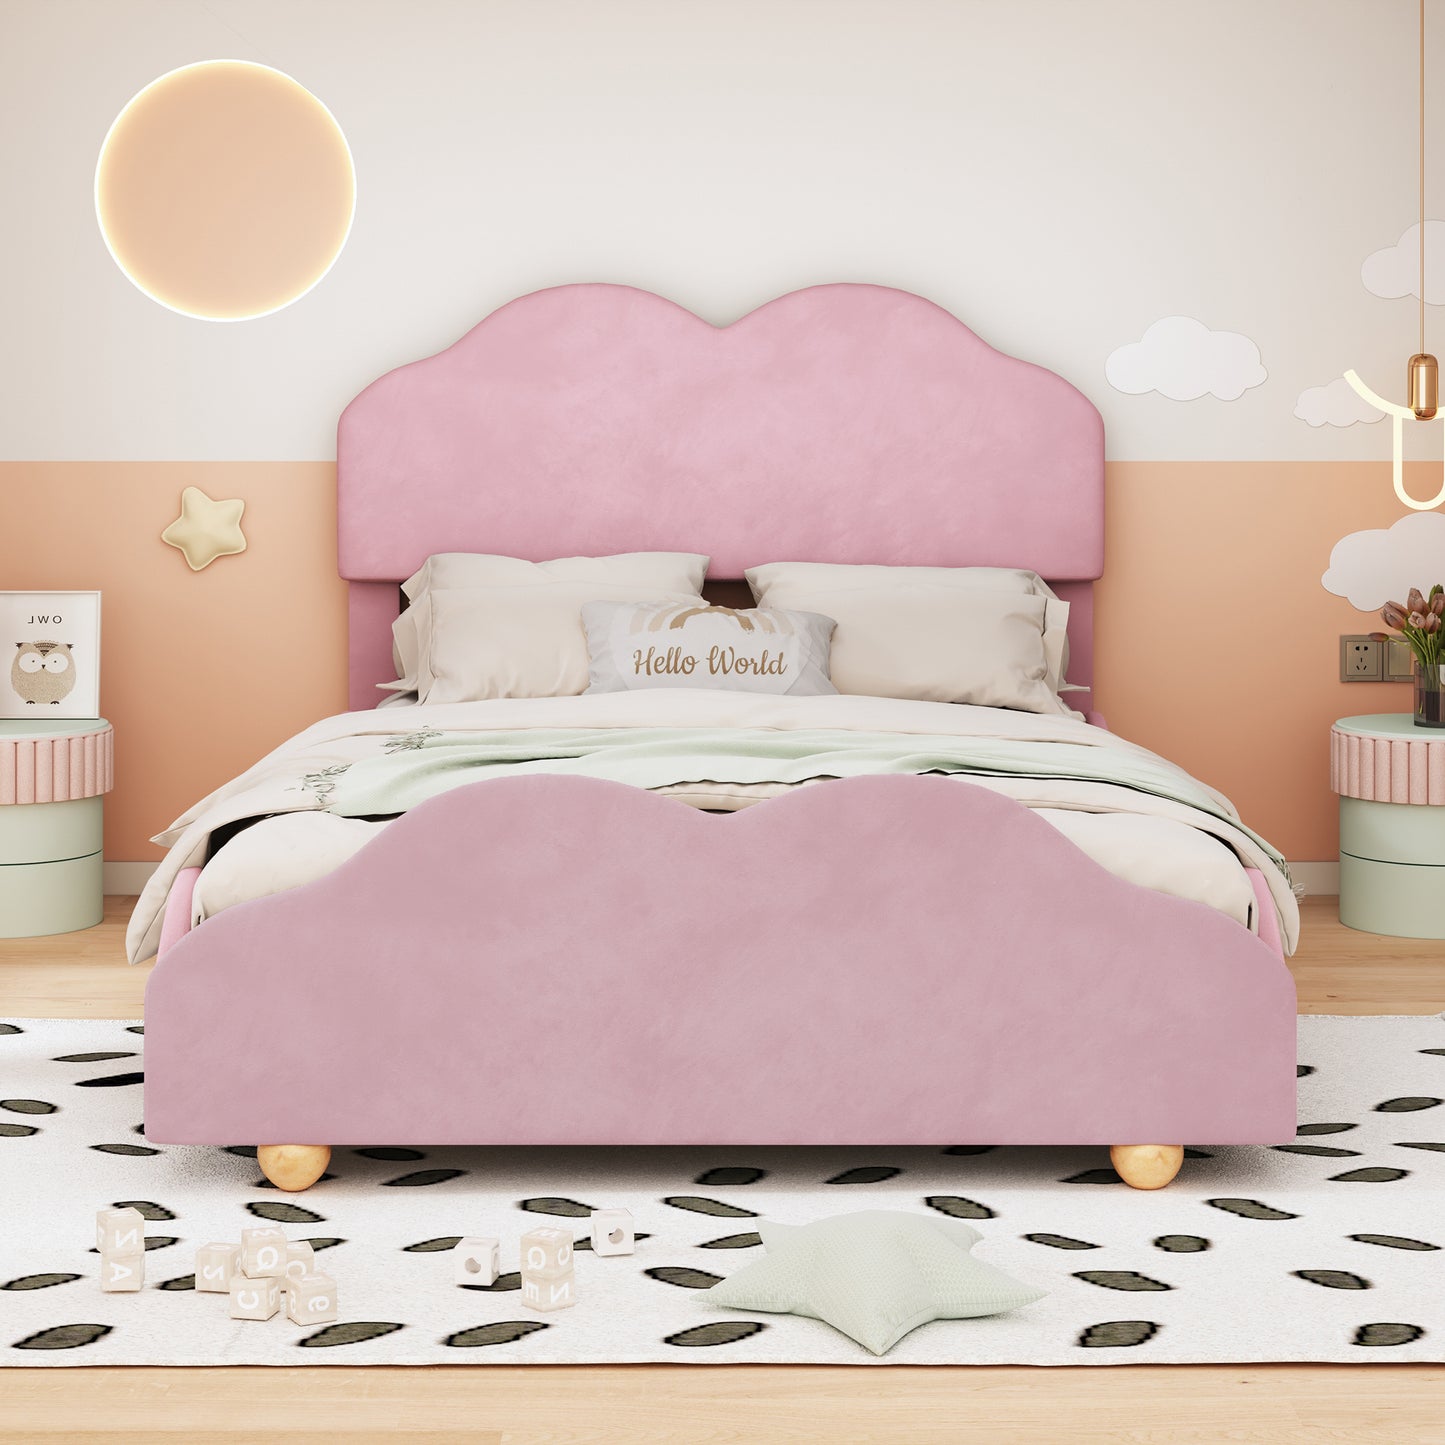 upholstered bed with cloud shaped bed board, light pink